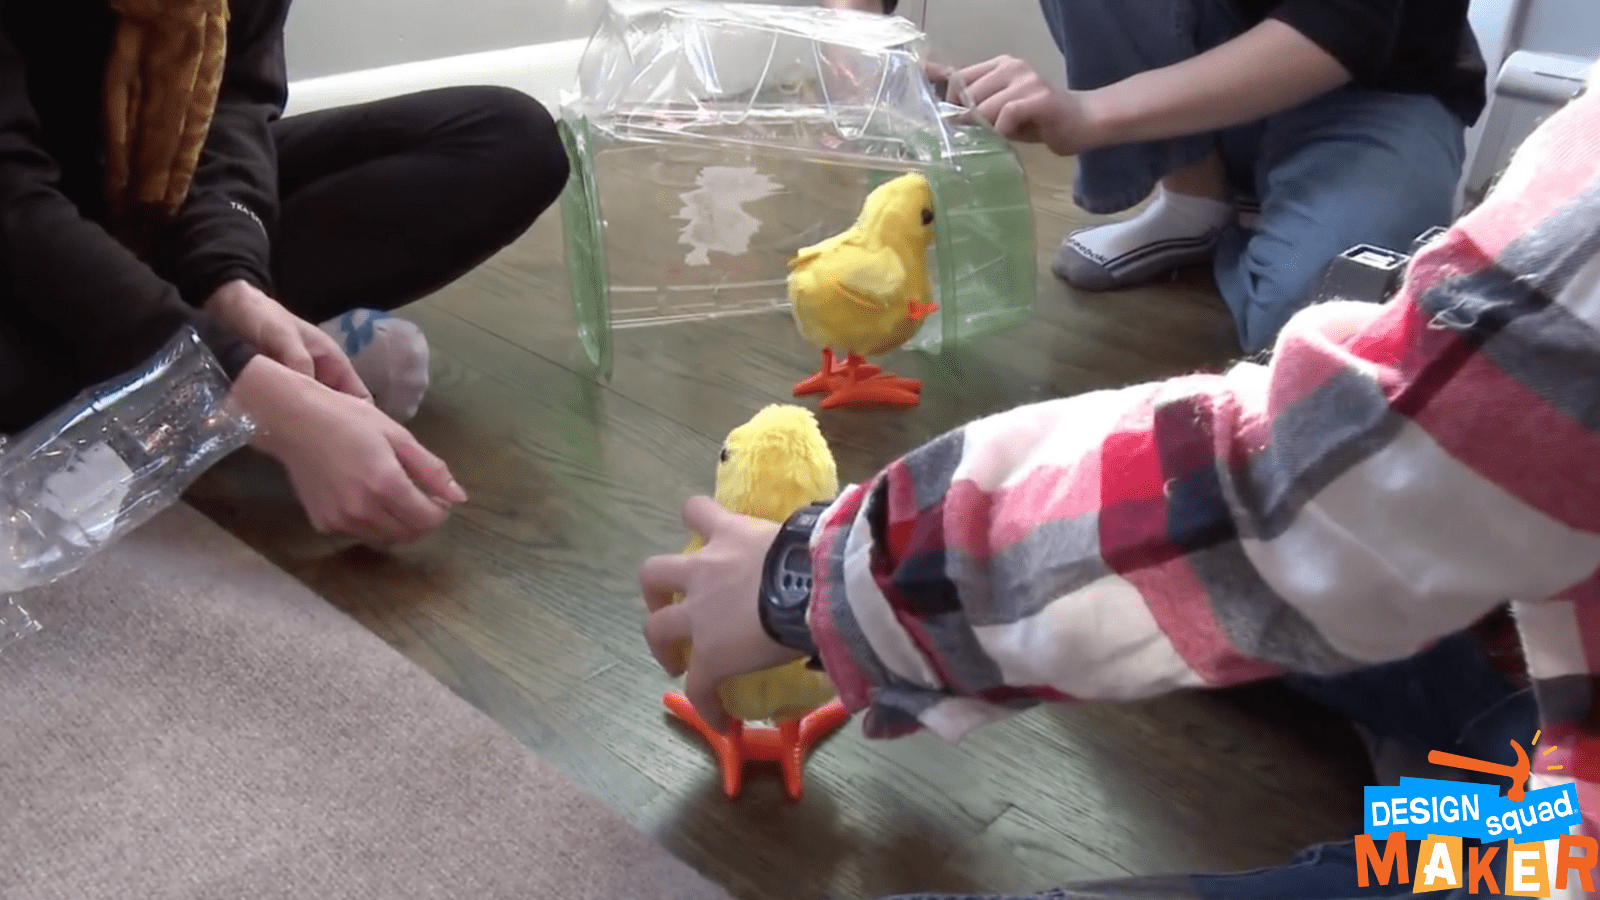 Located on a wooden floor are two wind-up baby chicks. One person is taping together different pieces of plastic to shelter the baby chick. The other chick is being grasped by someone else's hand.